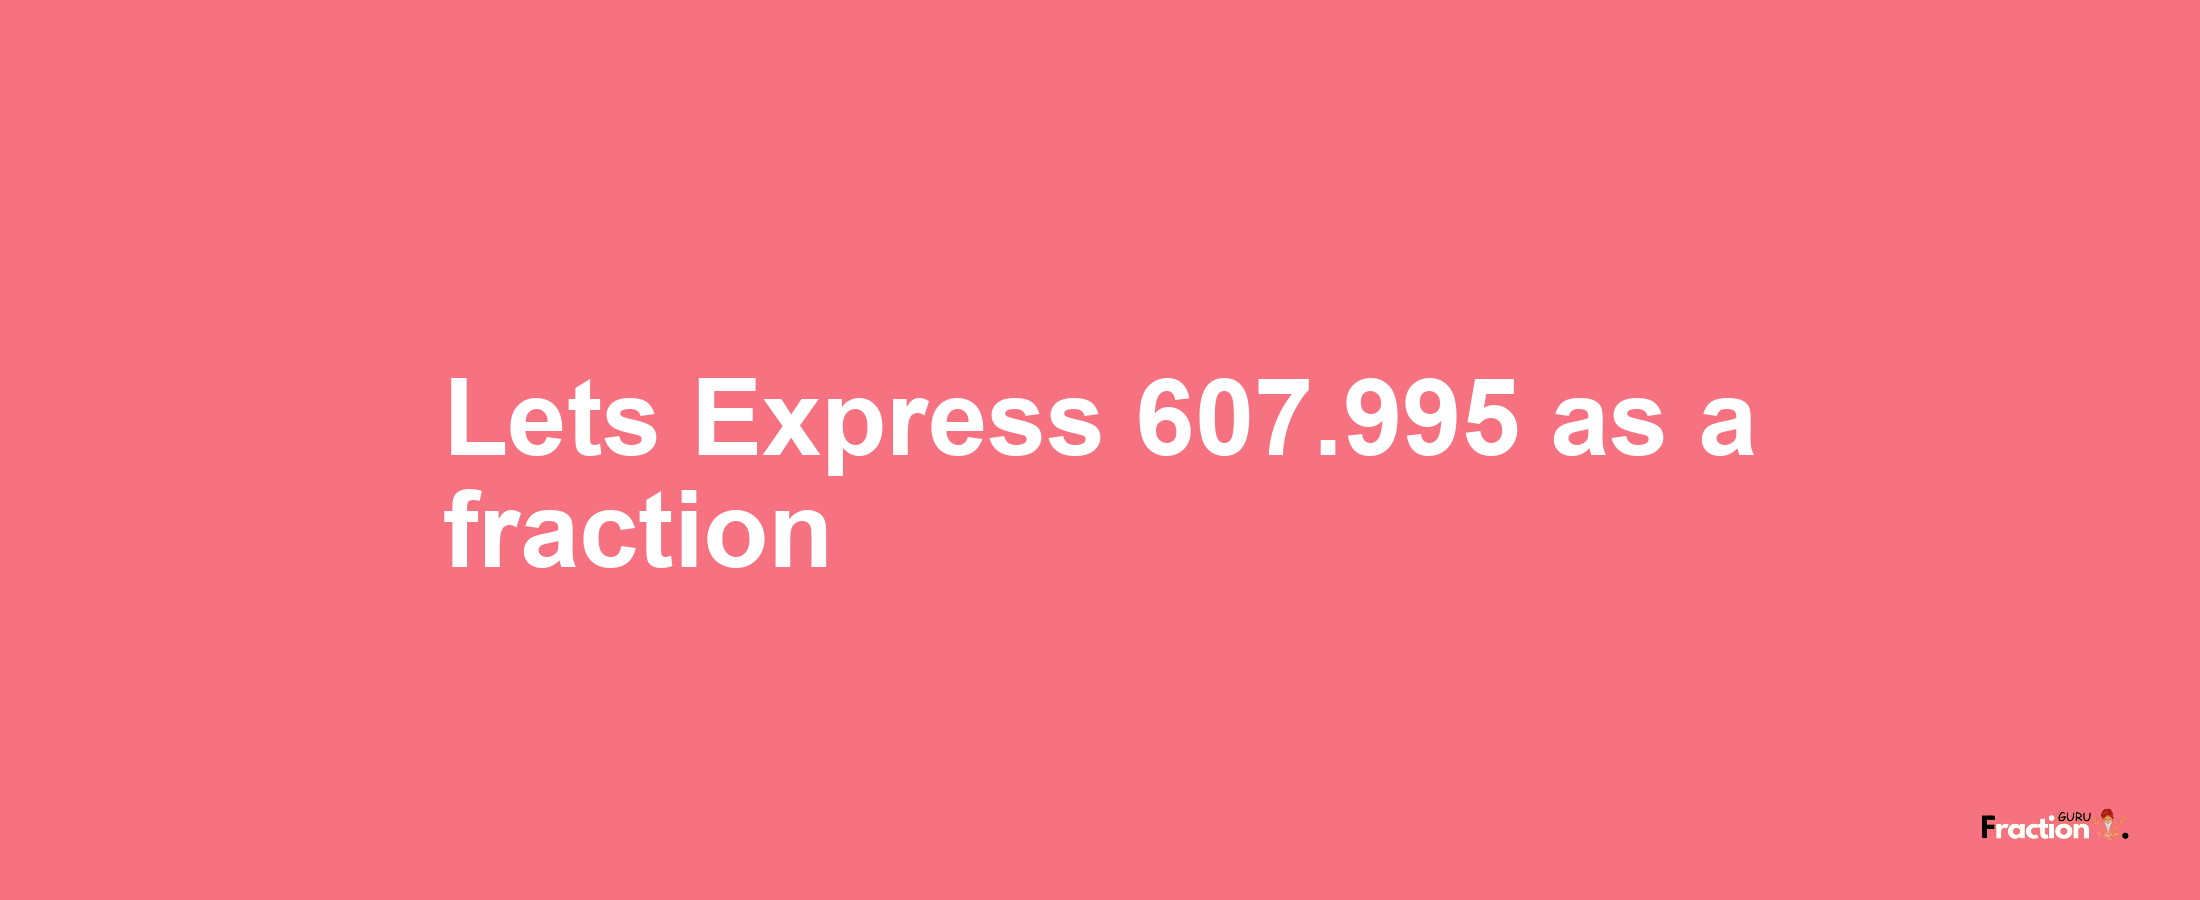 Lets Express 607.995 as afraction